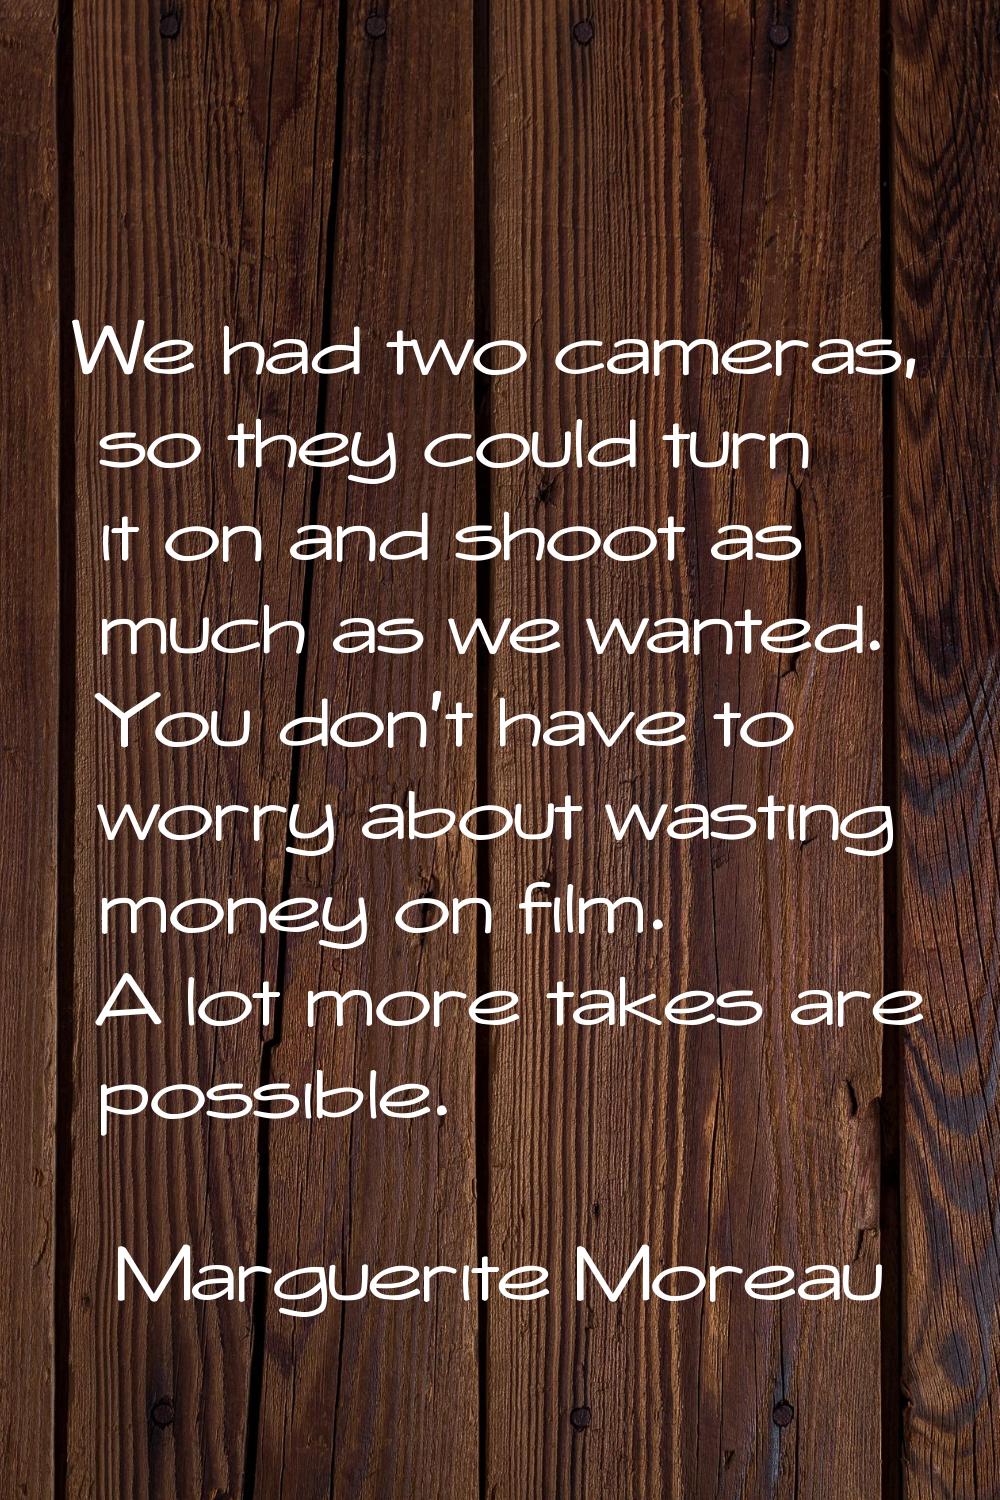 We had two cameras, so they could turn it on and shoot as much as we wanted. You don't have to worr